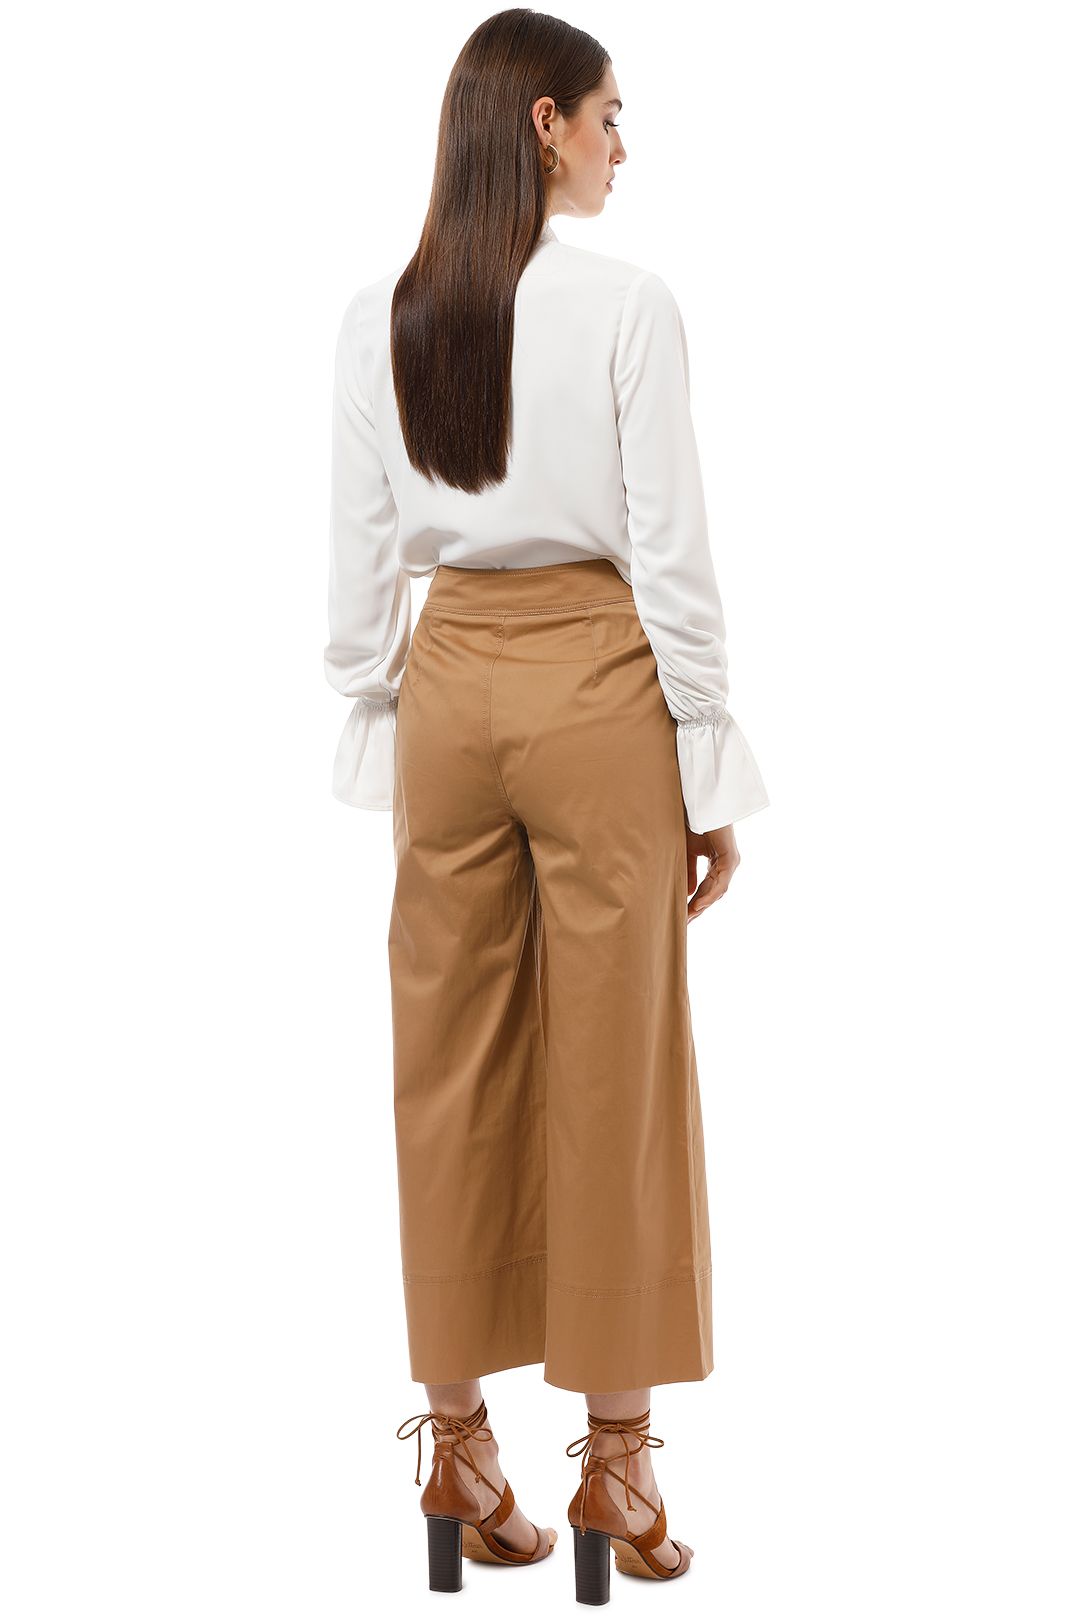 CMEO Collective - Adept Pants - Tan - Back